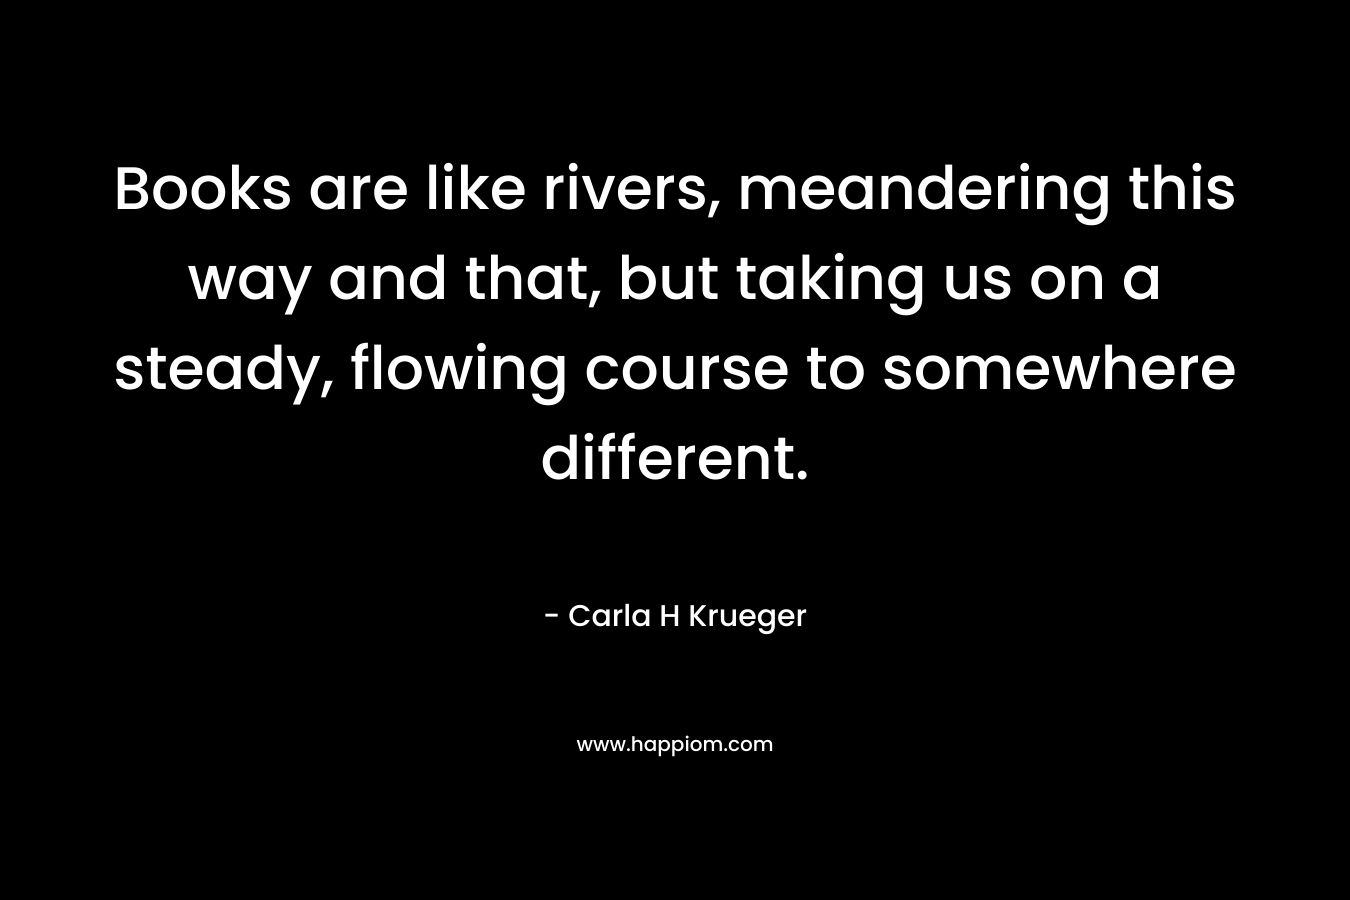 Books are like rivers, meandering this way and that, but taking us on a steady, flowing course to somewhere different. – Carla H Krueger